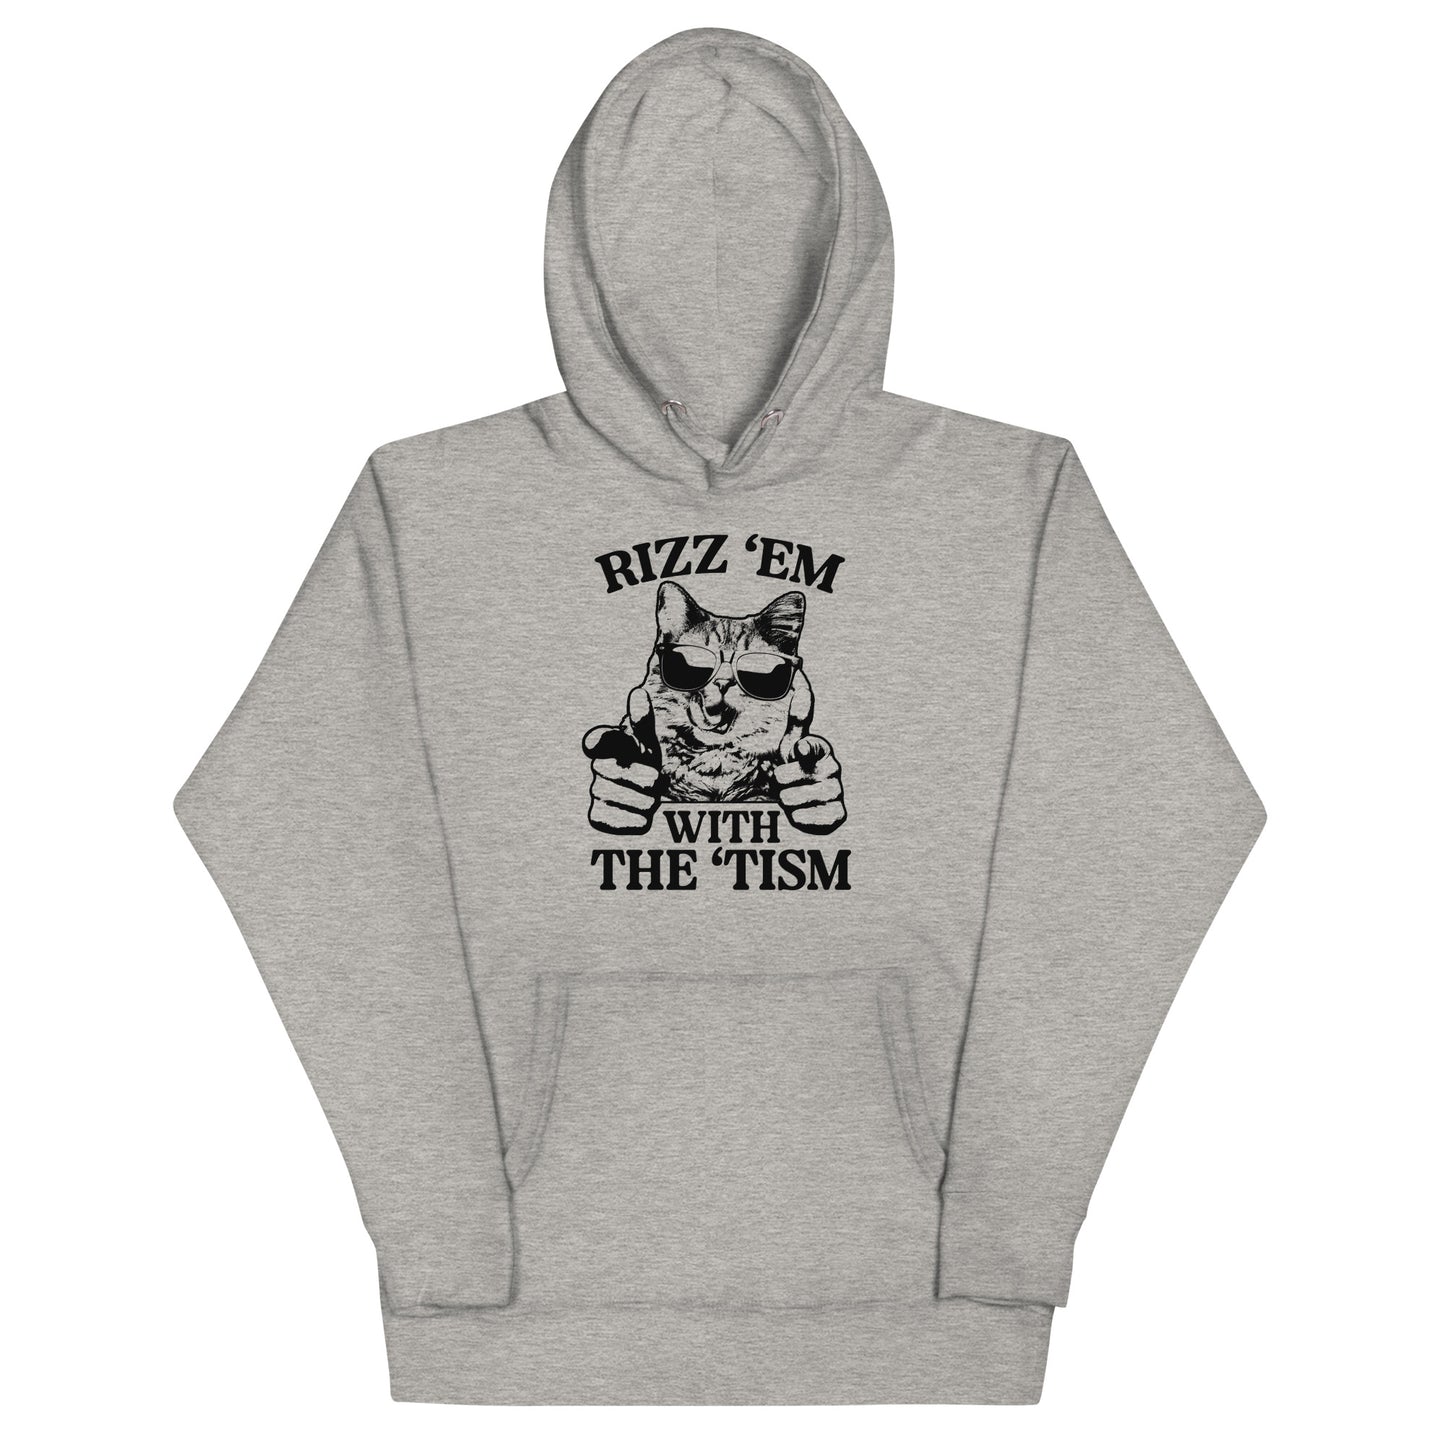 Rizz 'Em With the 'Tism (Cat) Unisex Hoodie